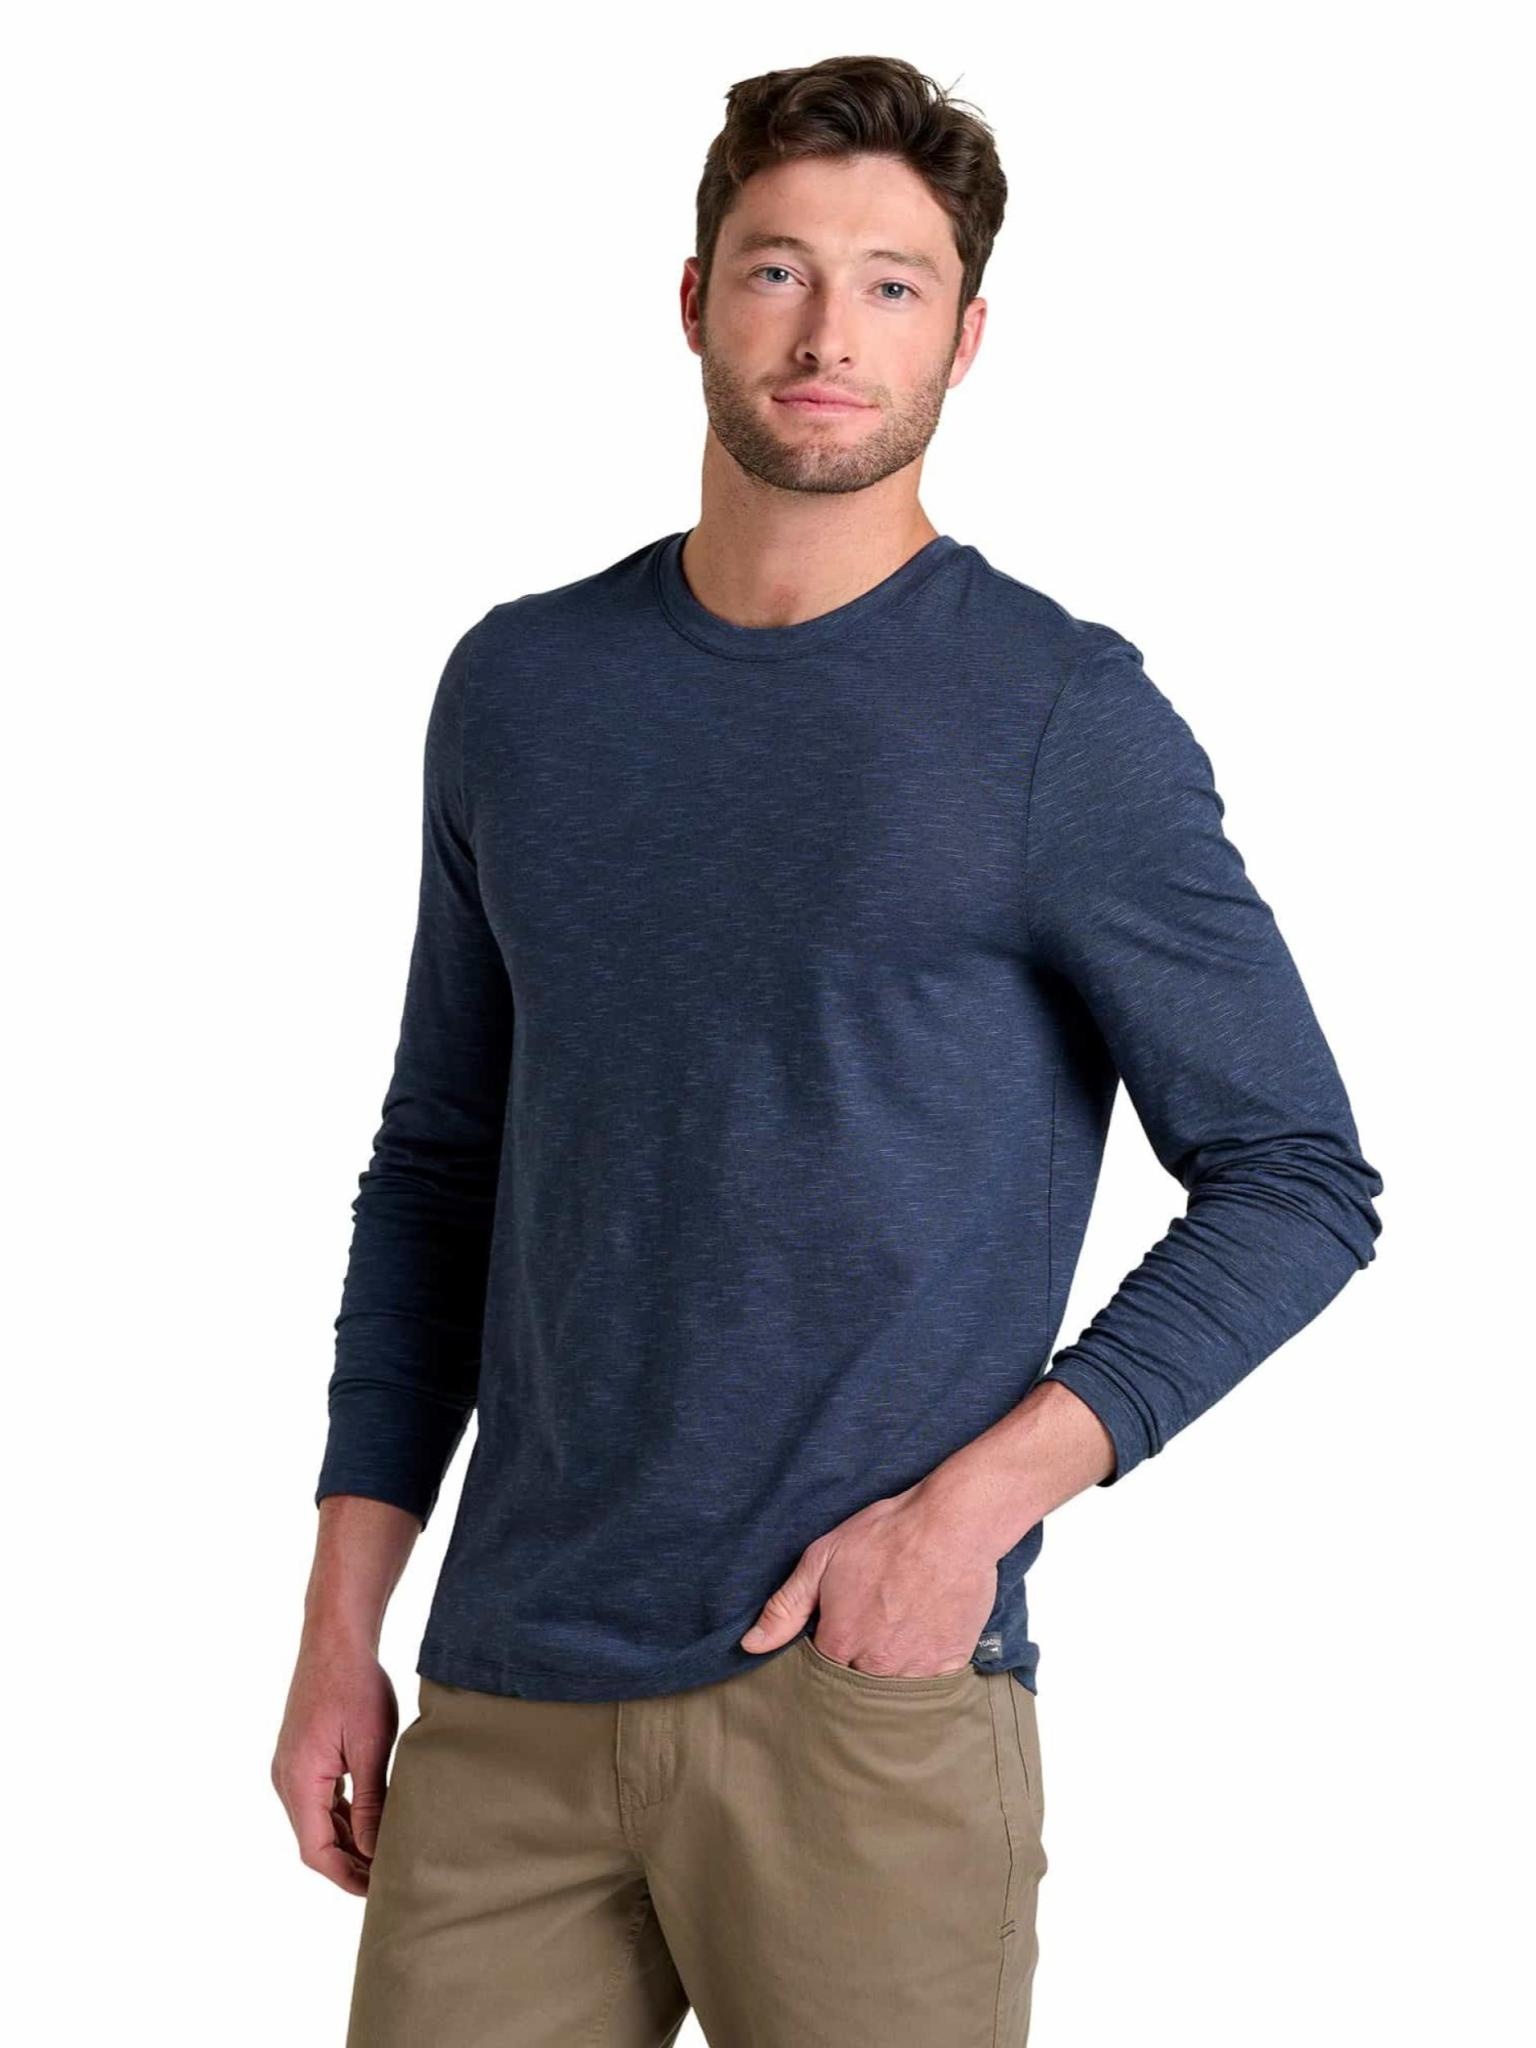 Men's Clothing - Outfitting adventure, work, and everything between ...